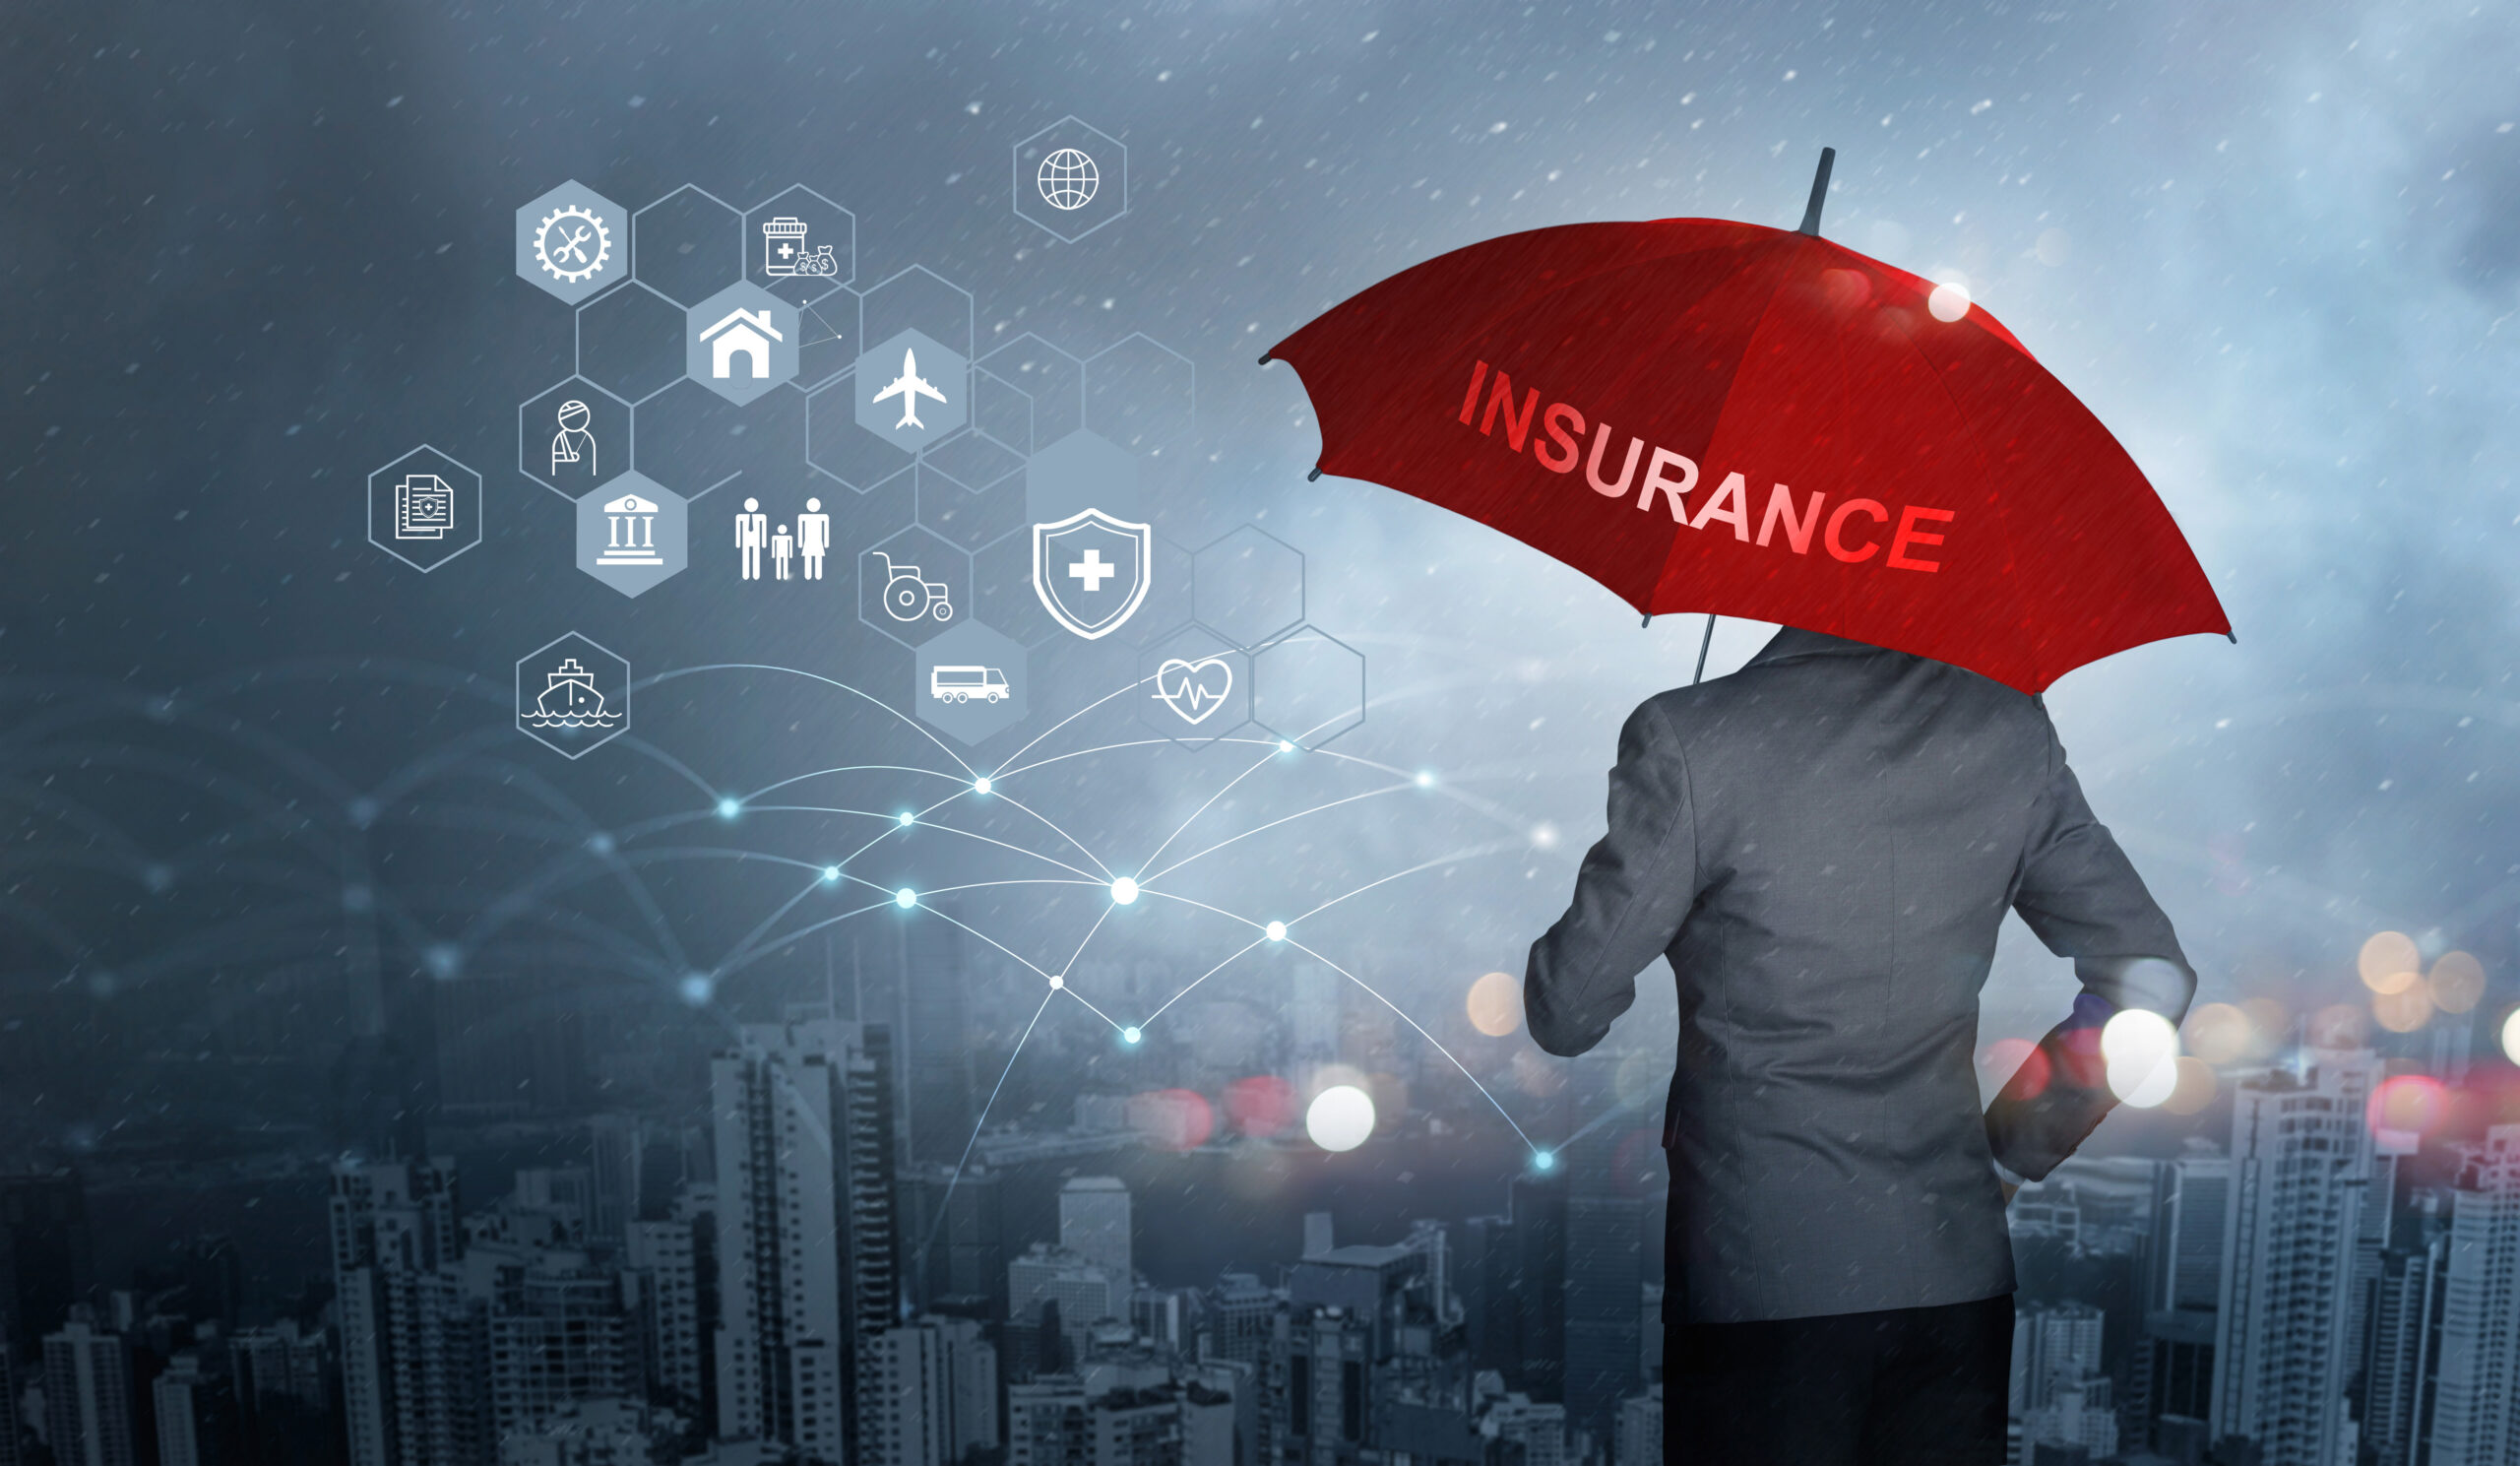 graphic of man holding an umbrella that says insurance on it